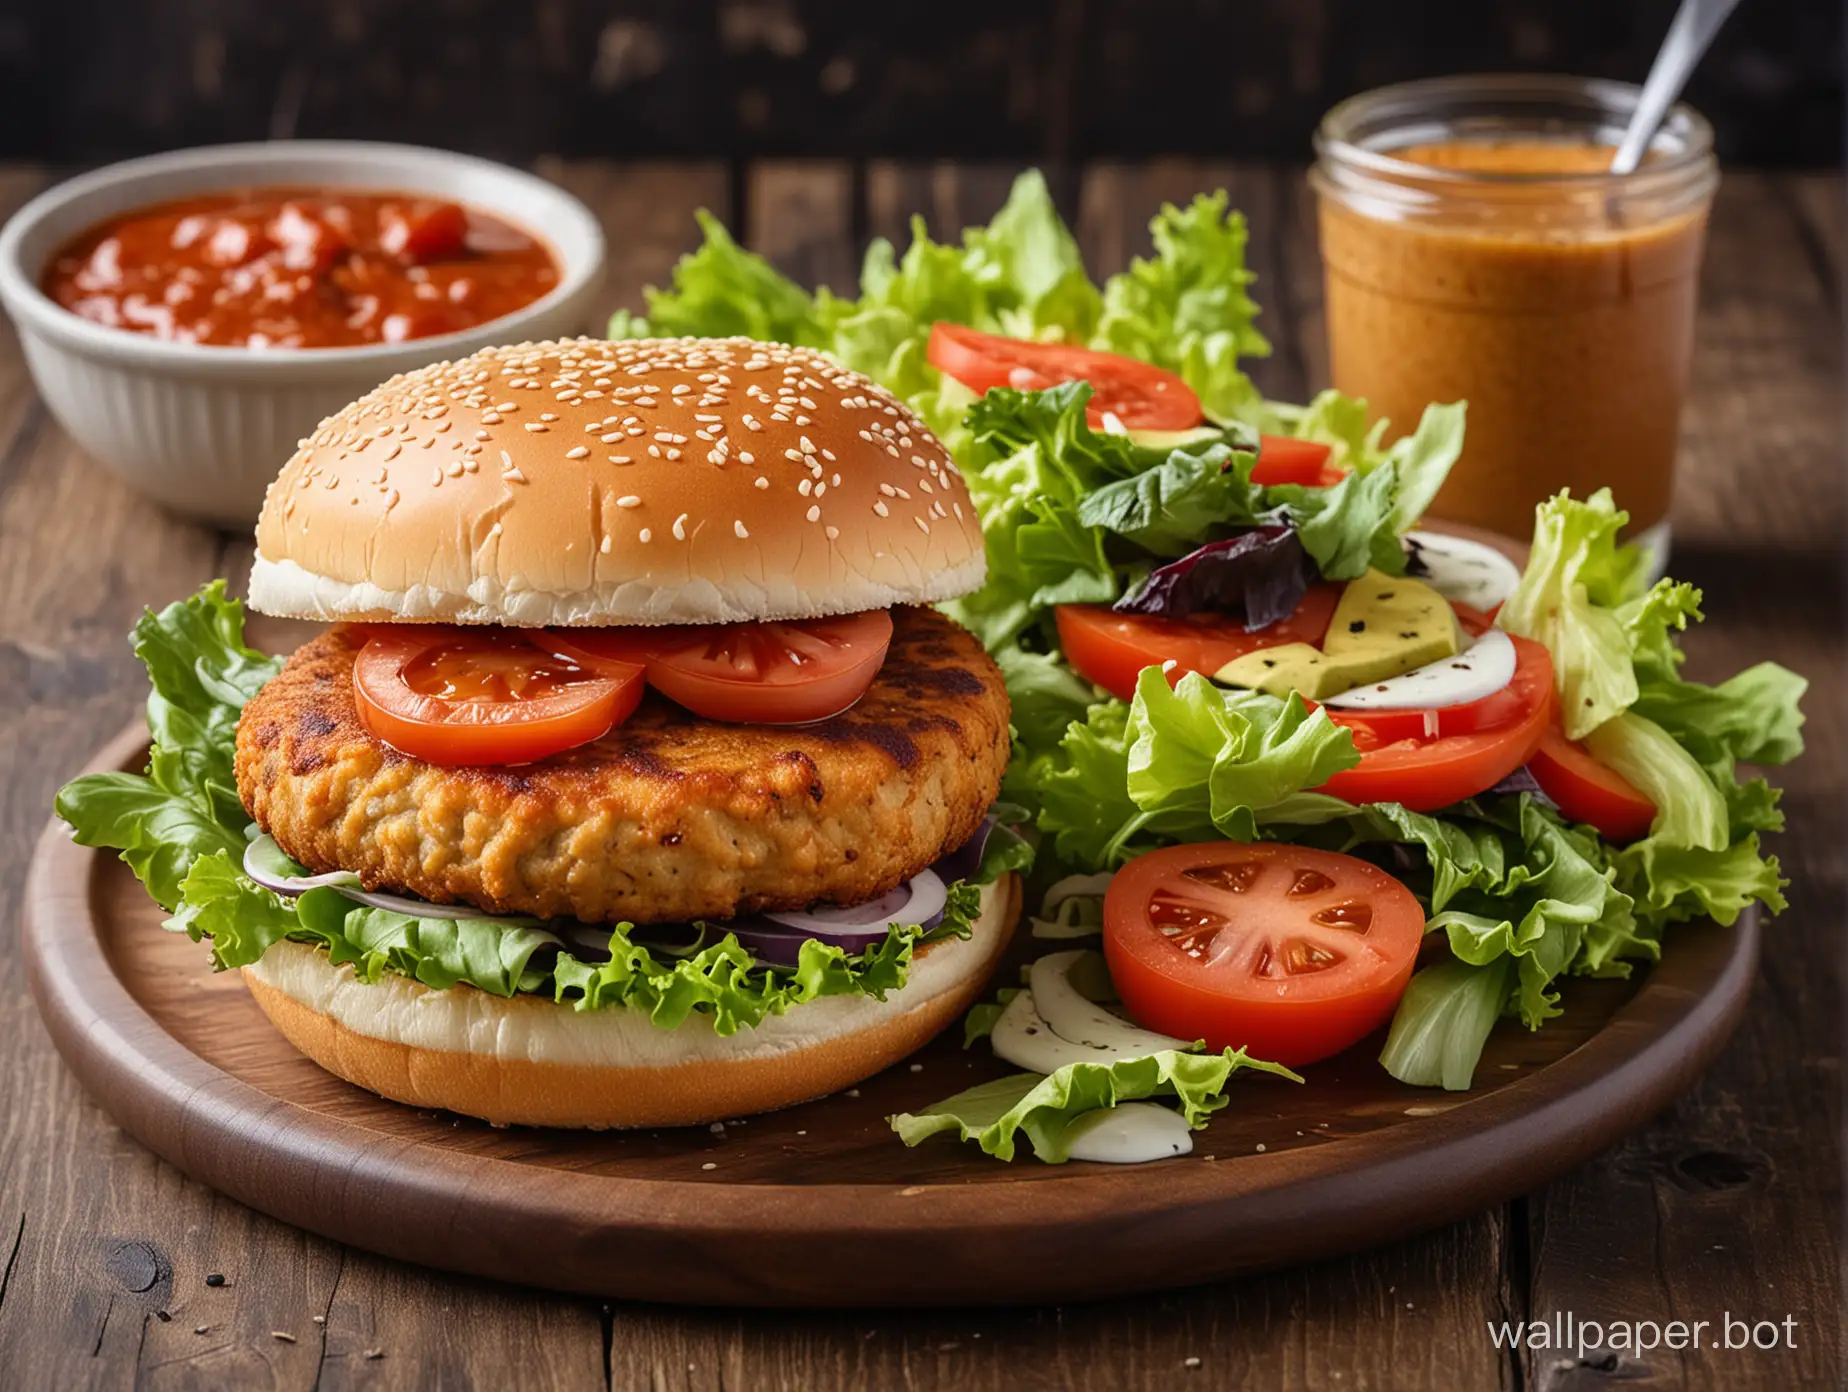 A burger with chicken cutlet, salad dressing, tomato sauce, various vegetables inside, nutritious, and delicious in color and taste.